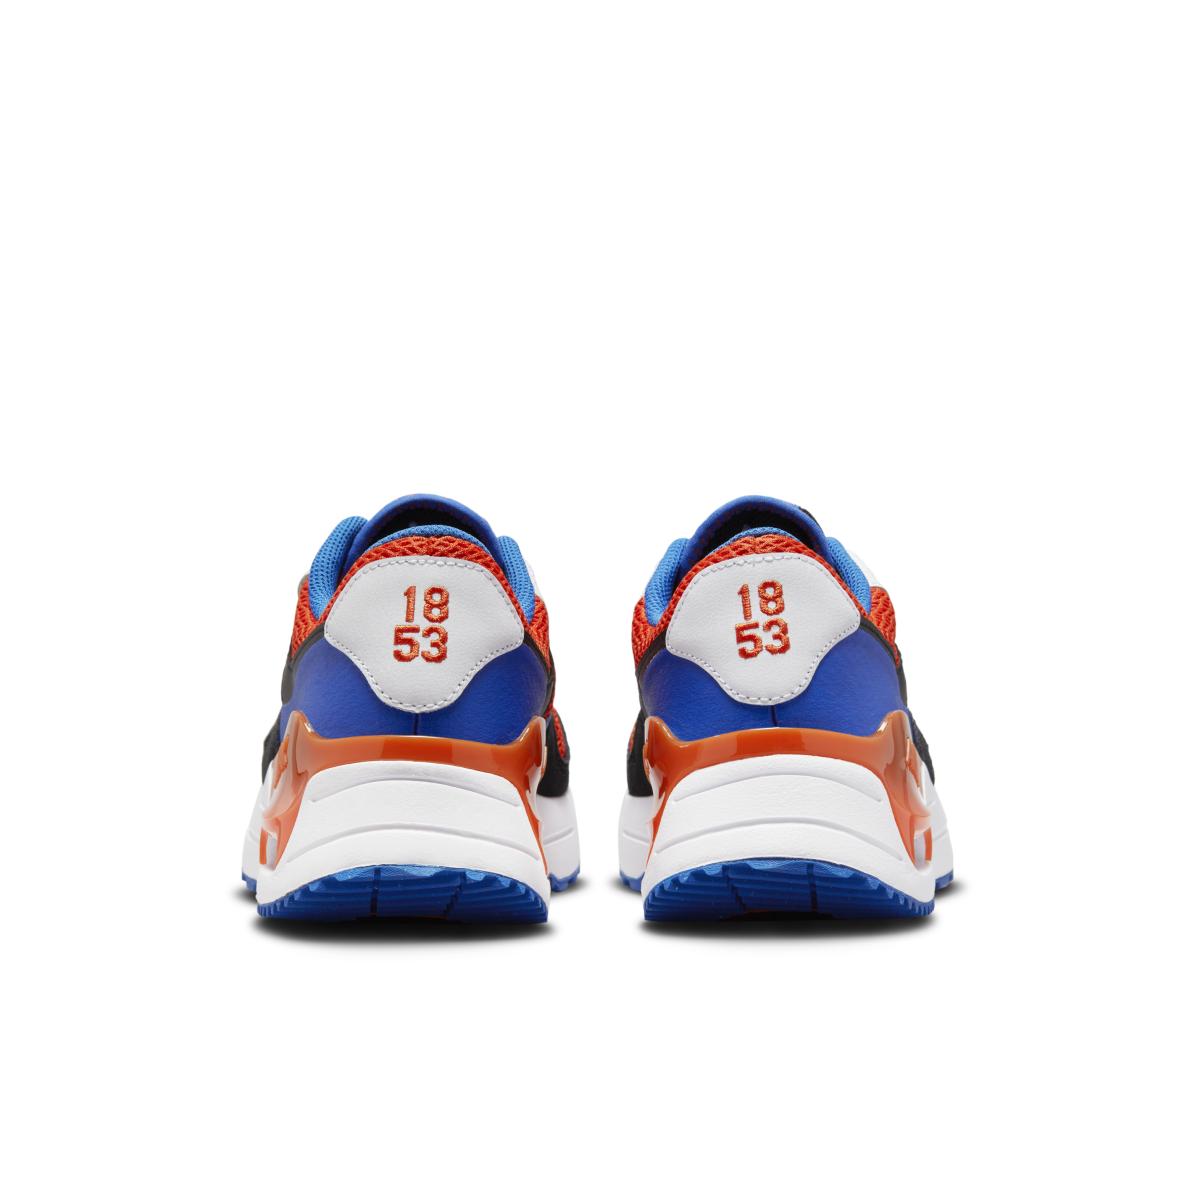 Florida Gators Nike Air Max Collection, how to buy your UF Air Max ...